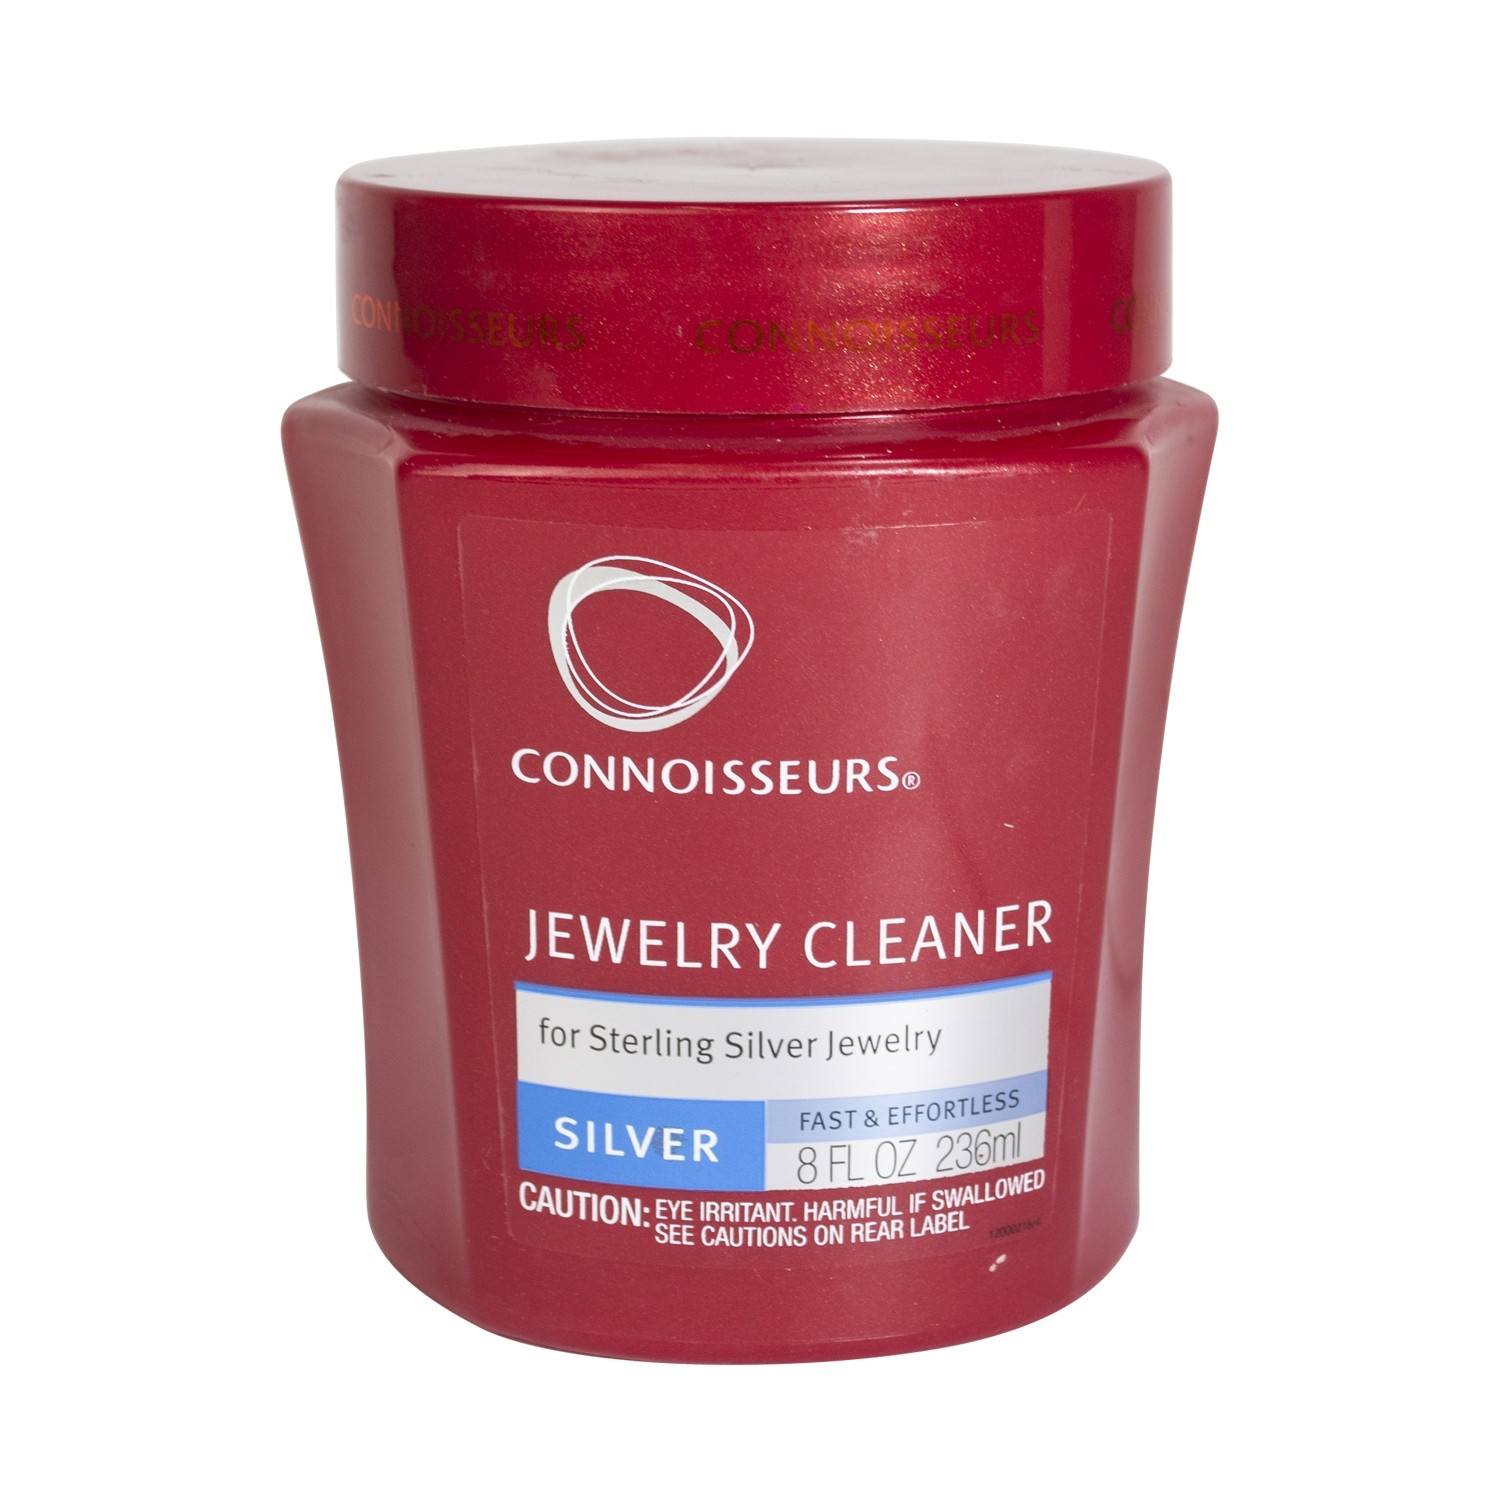 Silver jewelry cleaner